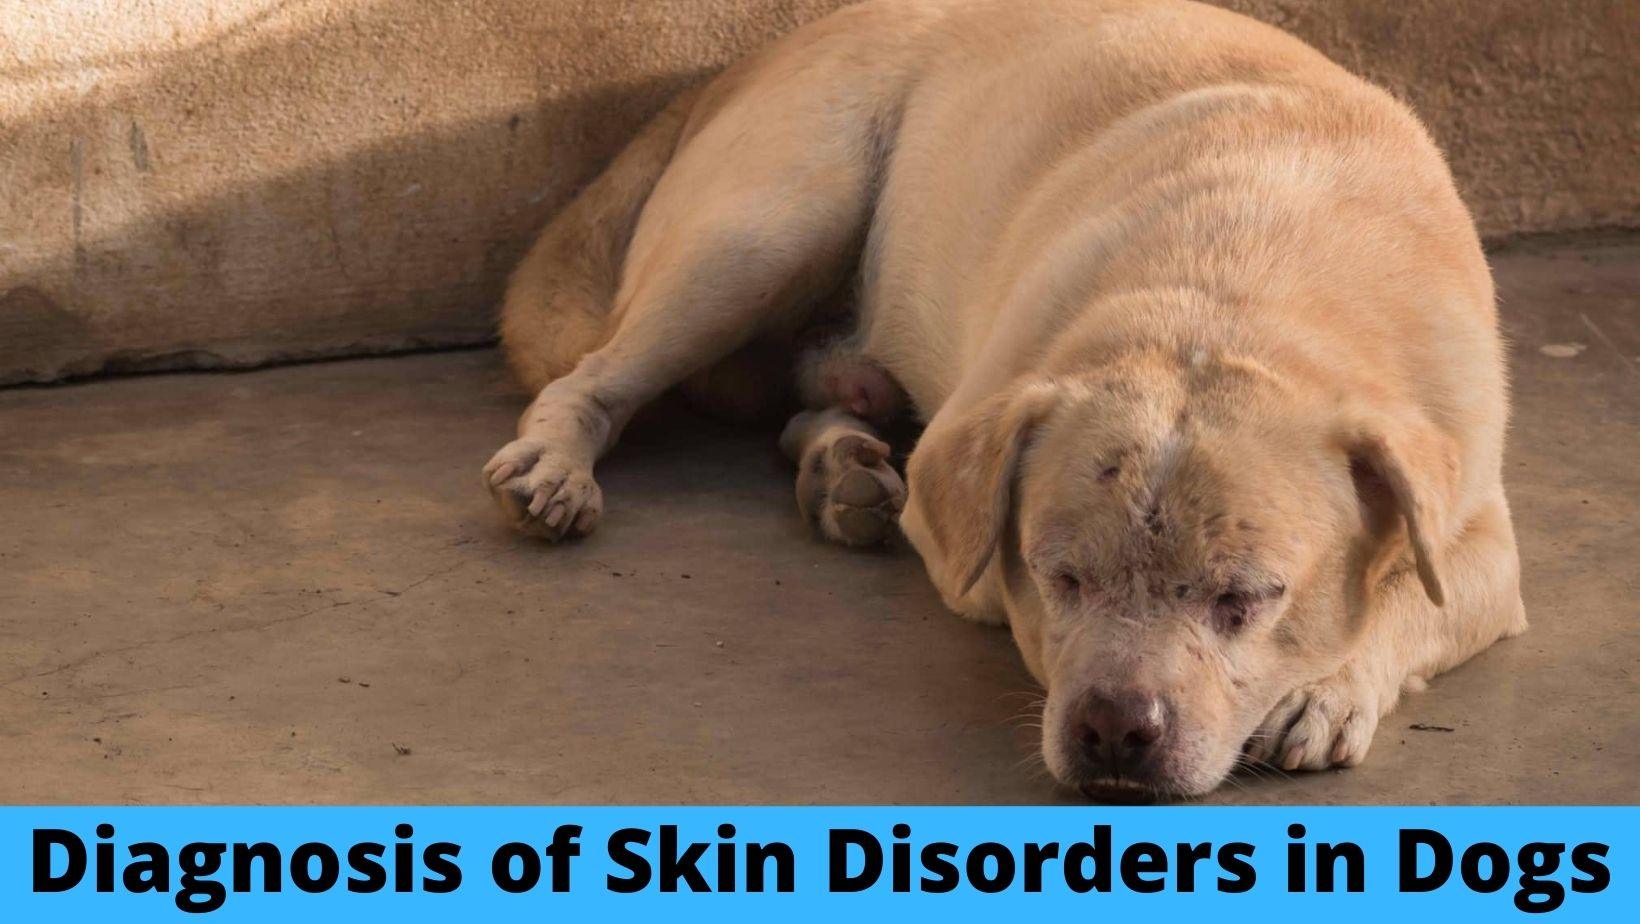 Diagnosis of Skin Disorders in Dogs